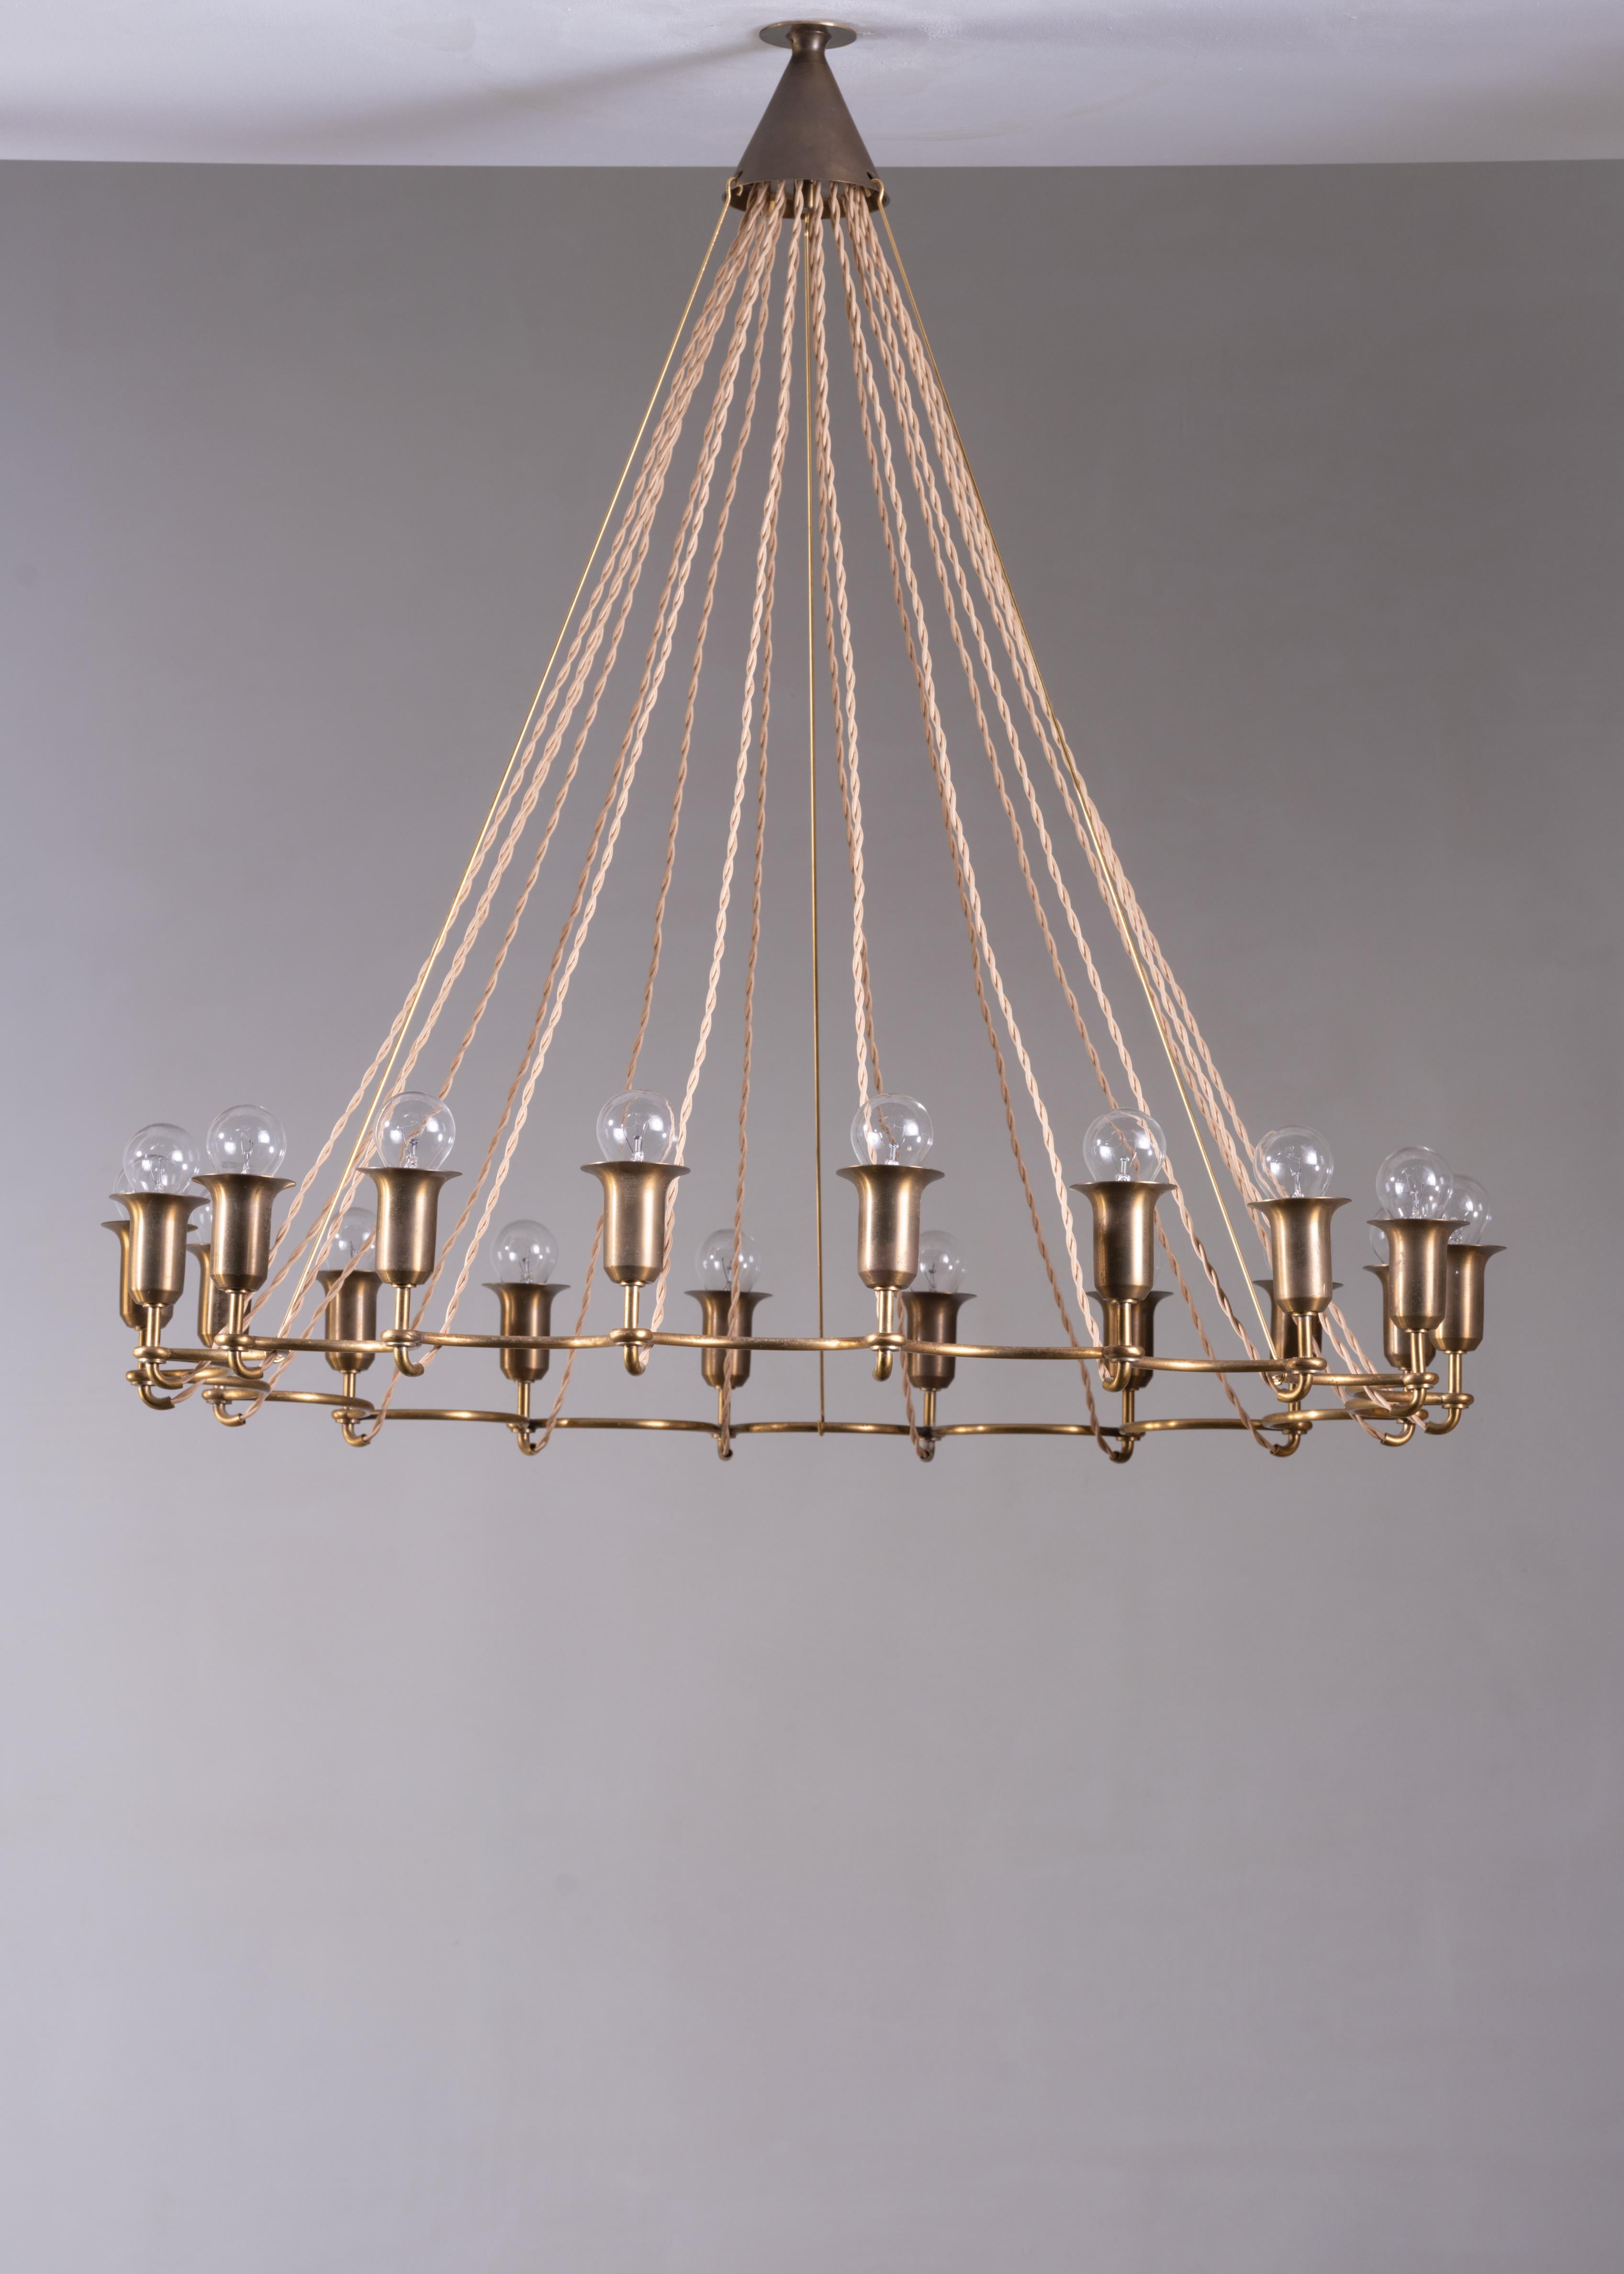 A large (84 cm diameter) Danish chandelier made of patinated brass with 18 sockets.

The wires come together in a cone shaped brass ceiling cap and the large circle is stabilized with nearly invisible long pens, going from the circular frame to the